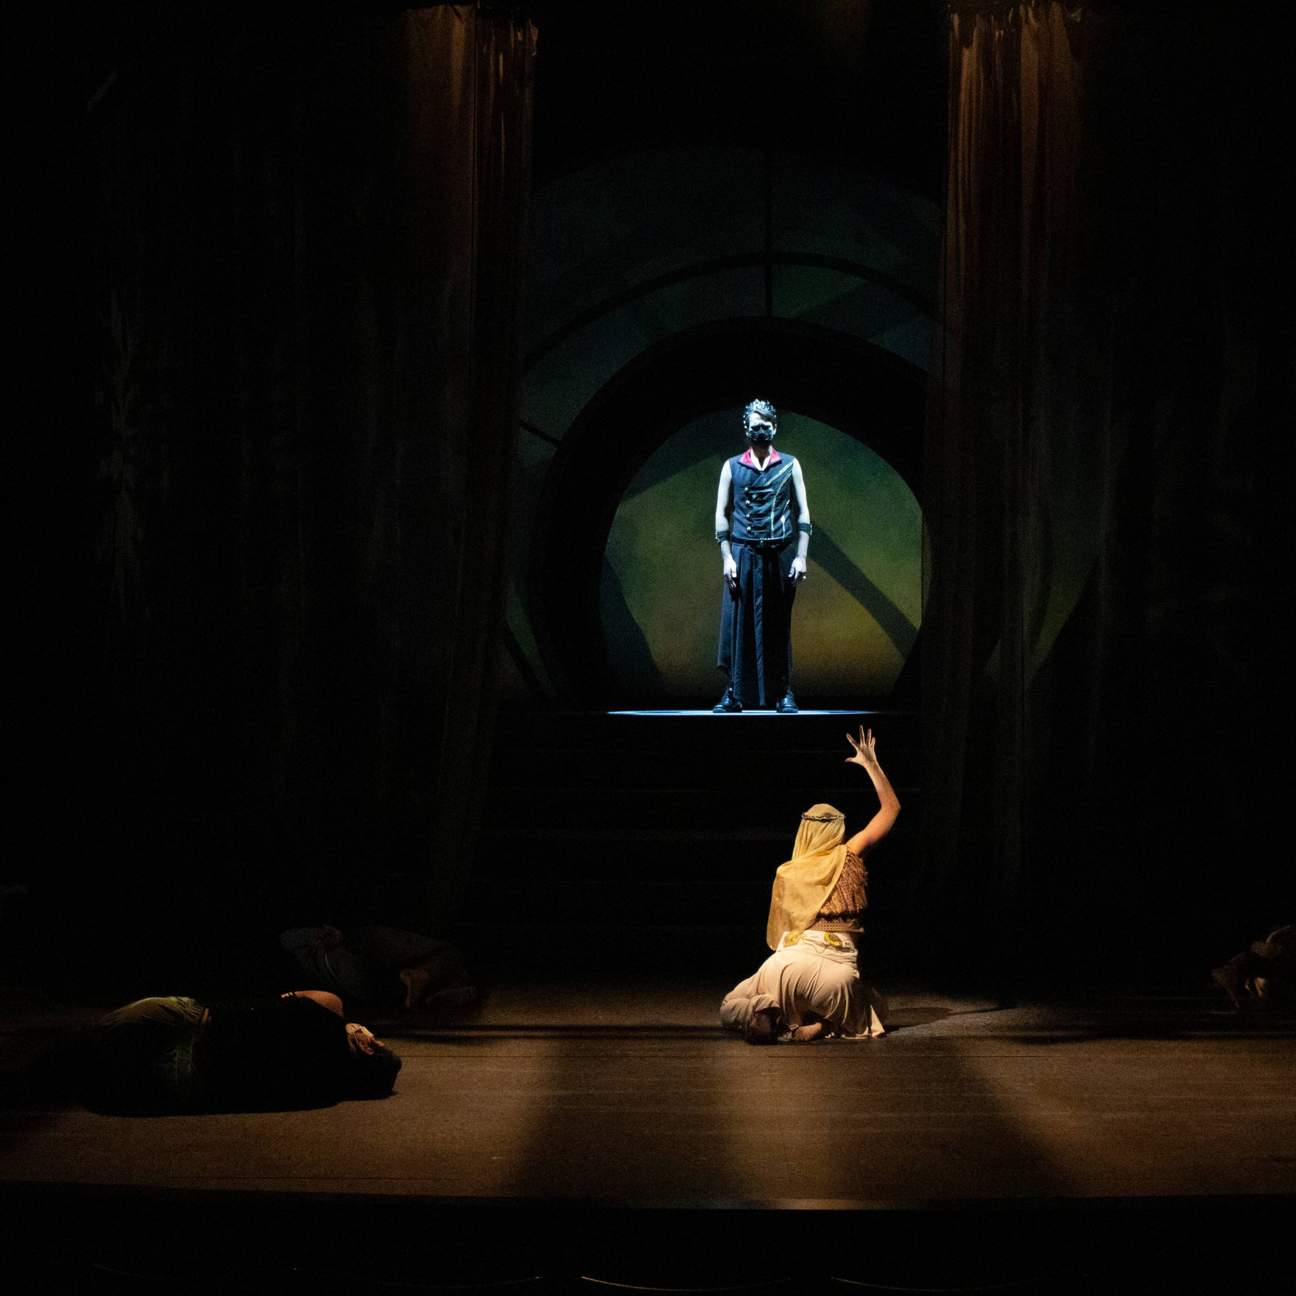 The King stands on a raised platform with a light shining on him from above. A female chorus member crawls to him, reaching her arms out to him.